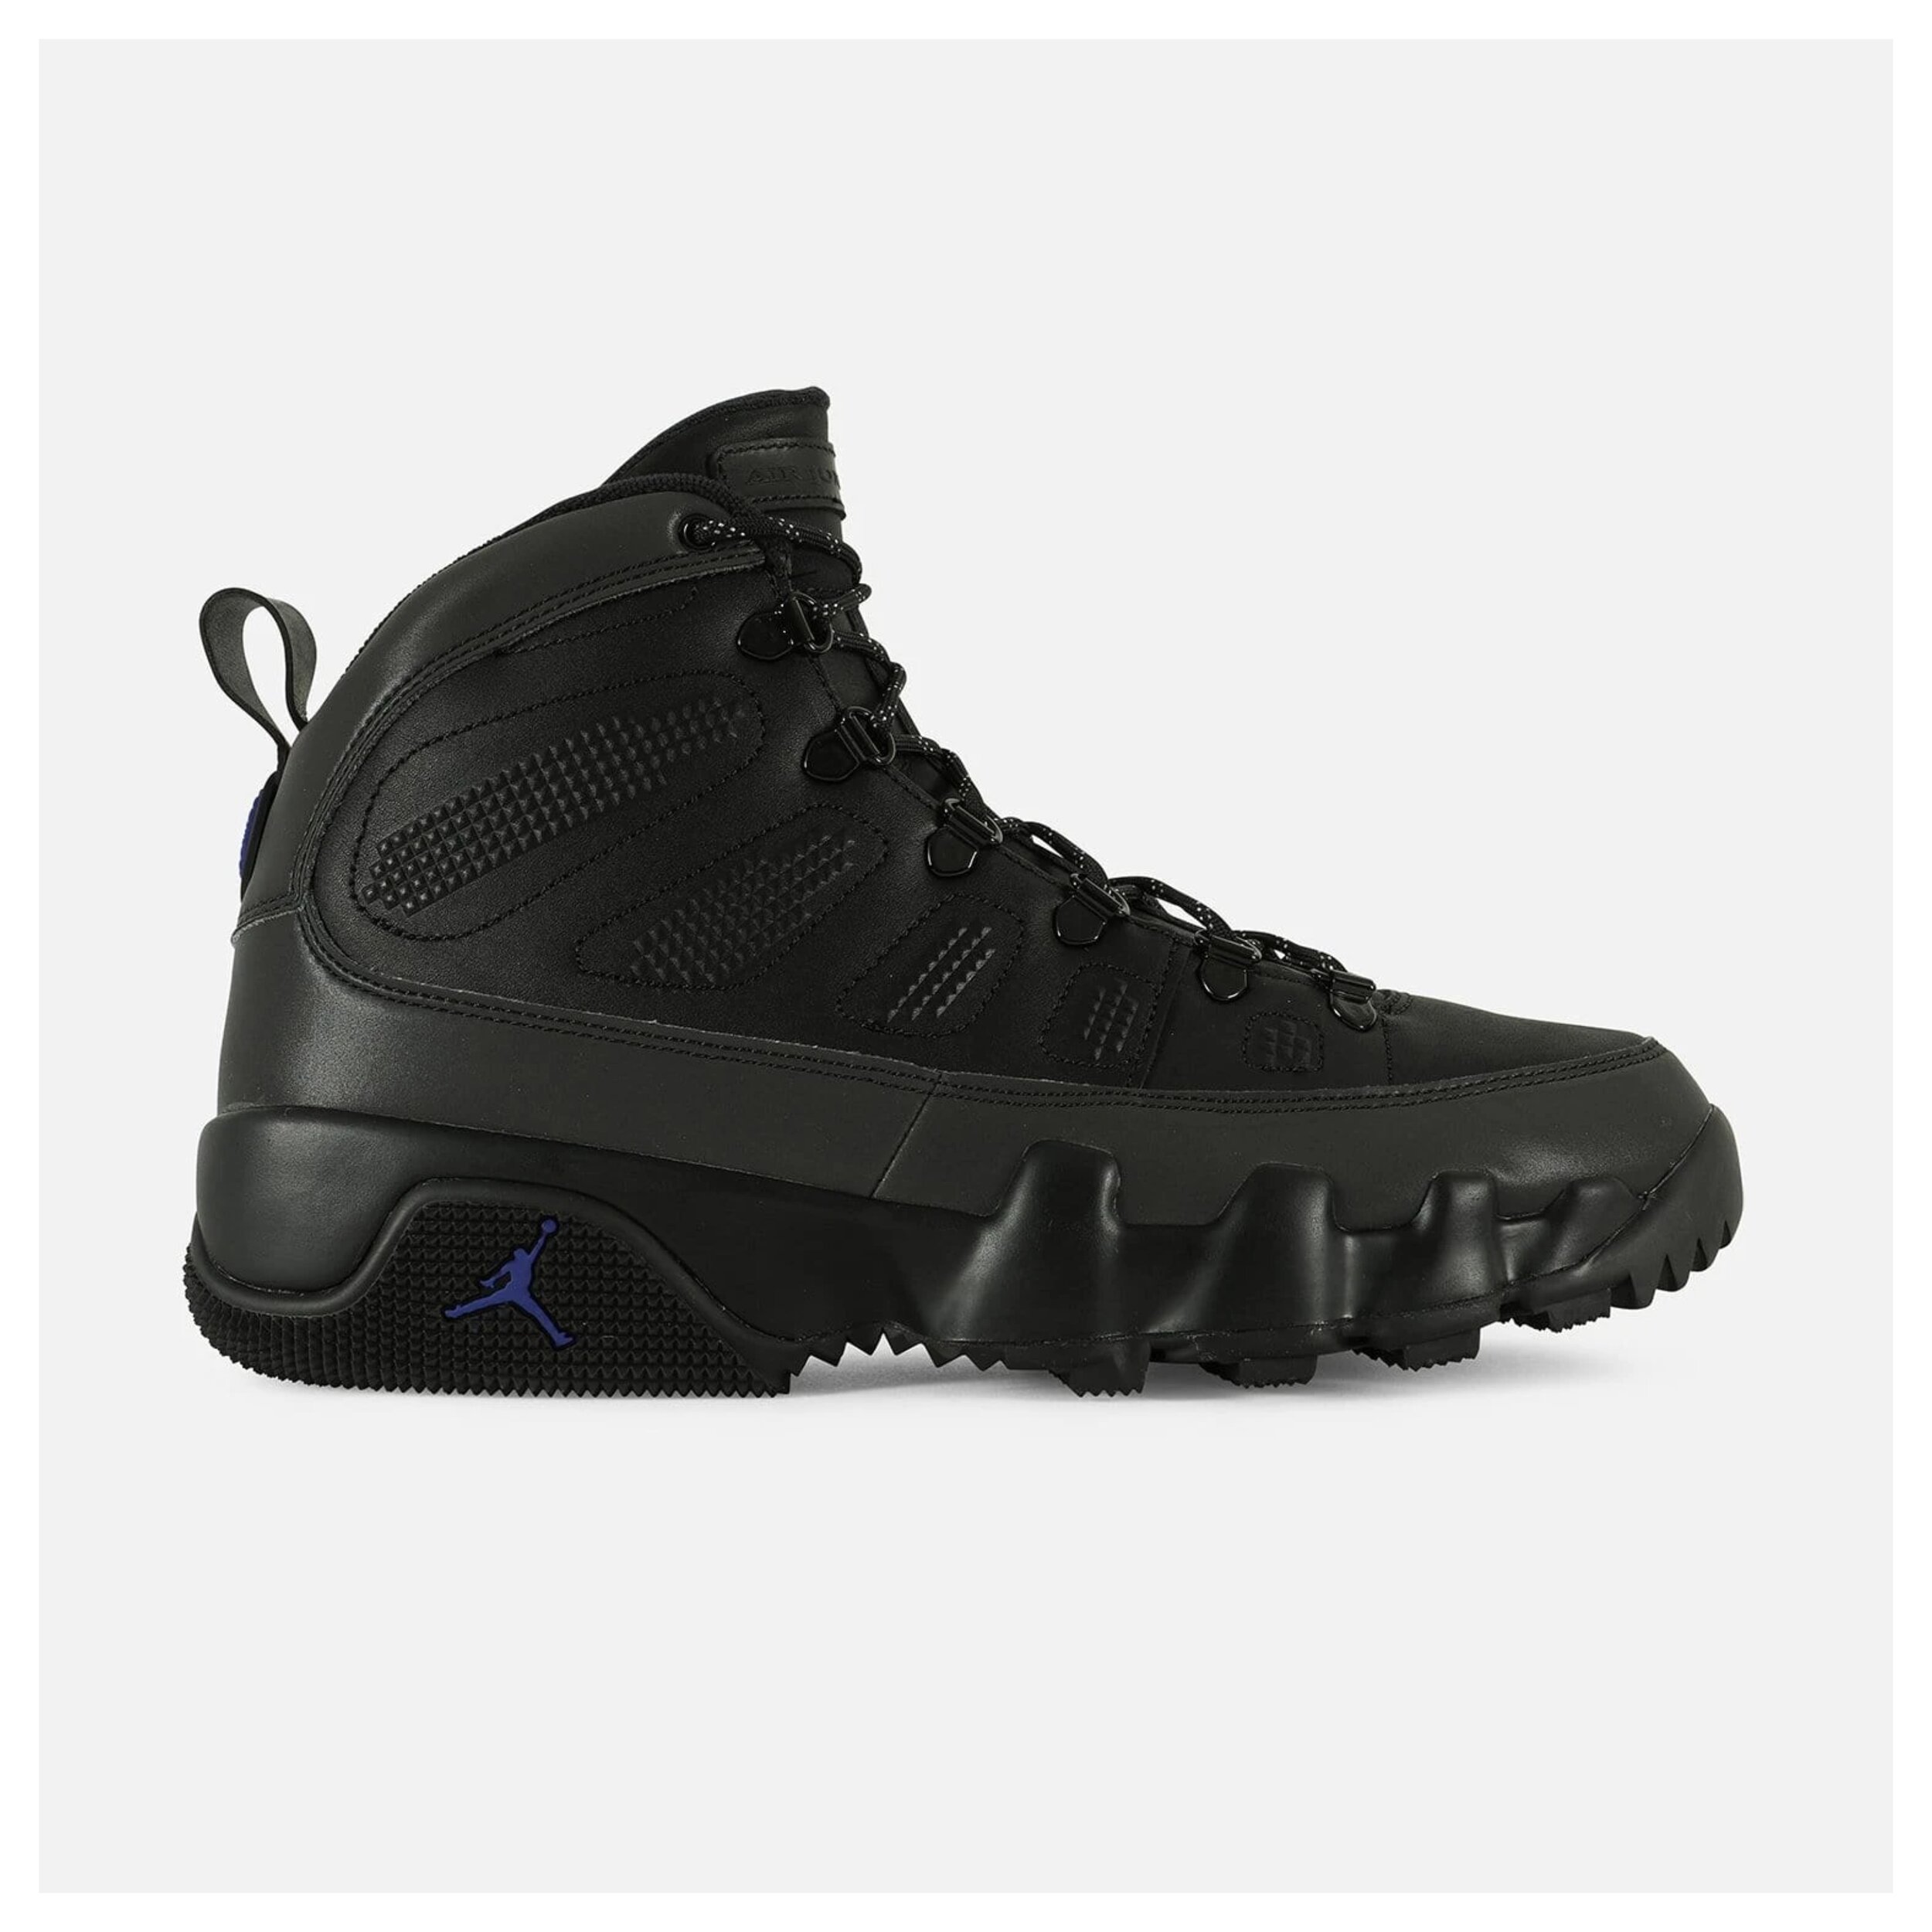 The Air Jordan 9 Boots Are On Sale For 